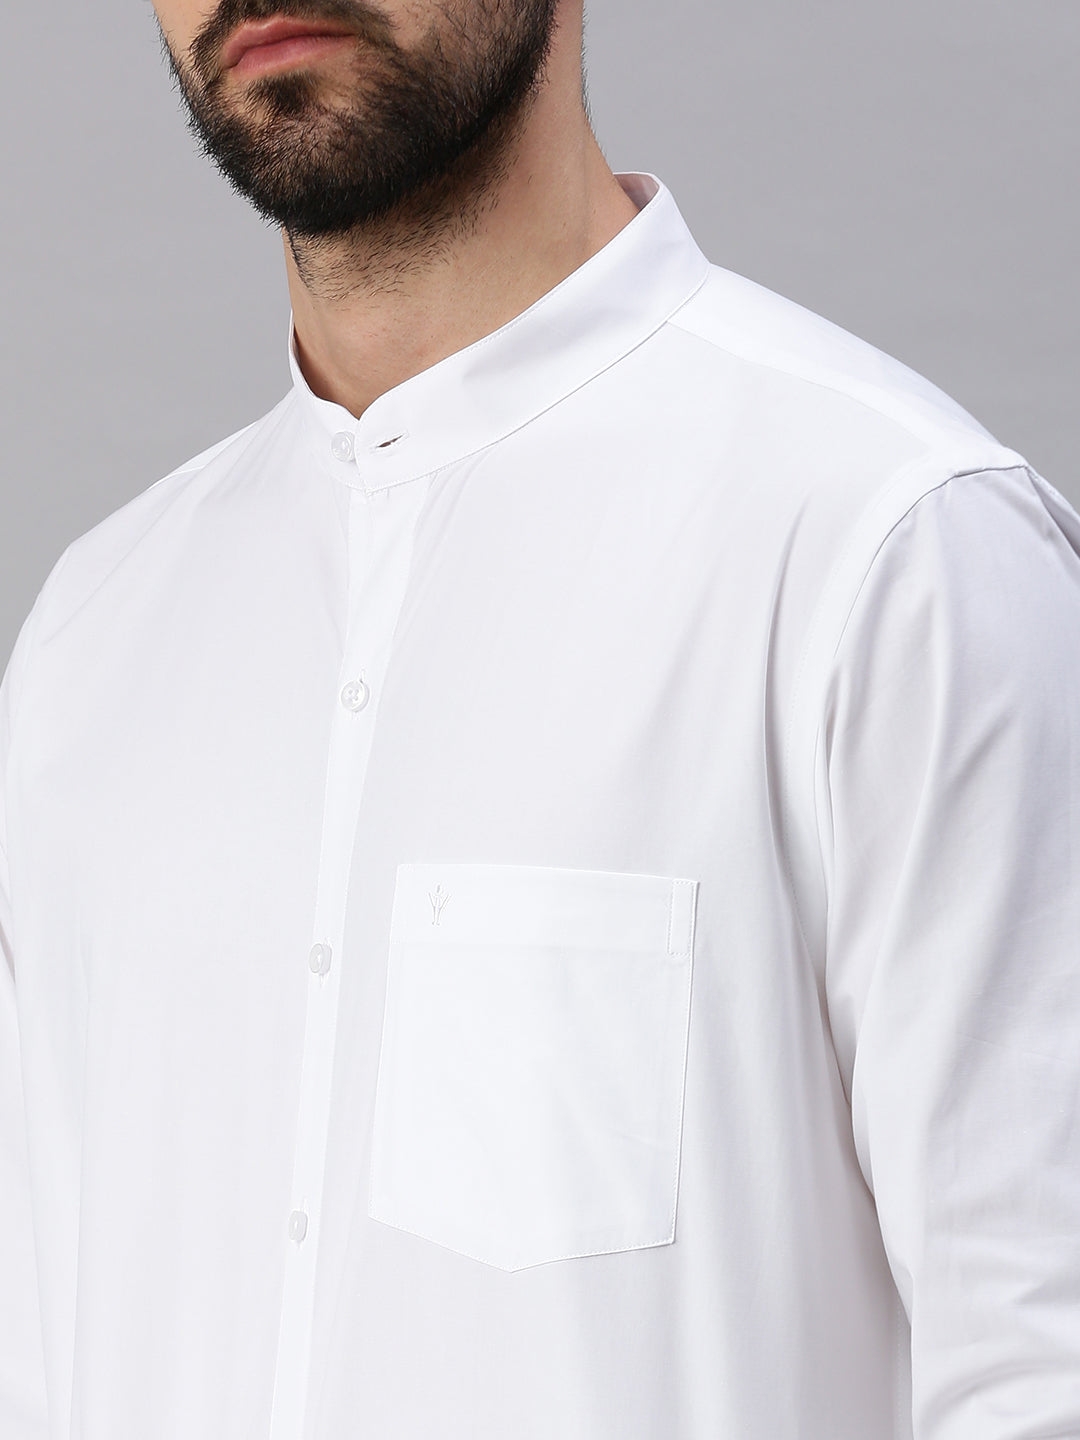 Mens 100% Cotton White Shirt Full Sleeves Plus Size Chinese Collar-Zoom view